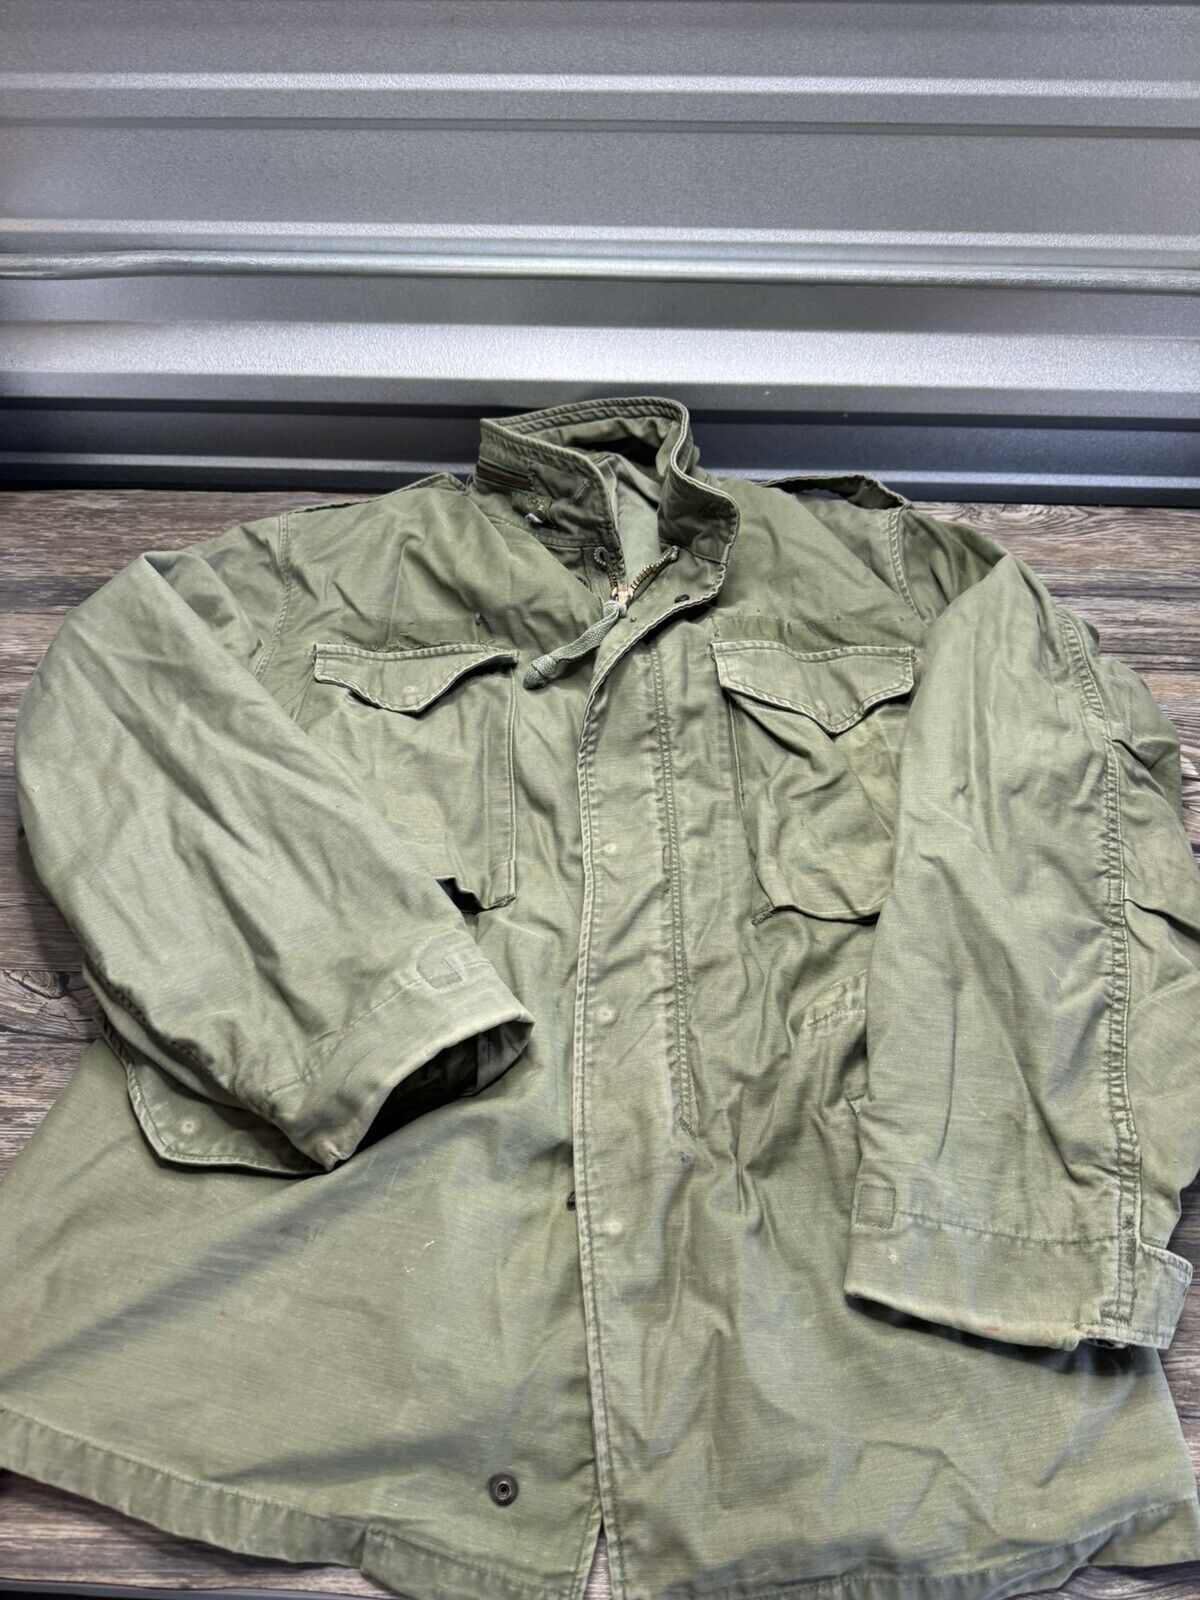 Vintage 70s Vietnam US Army M-65 Green Cold Weather Field Jacket